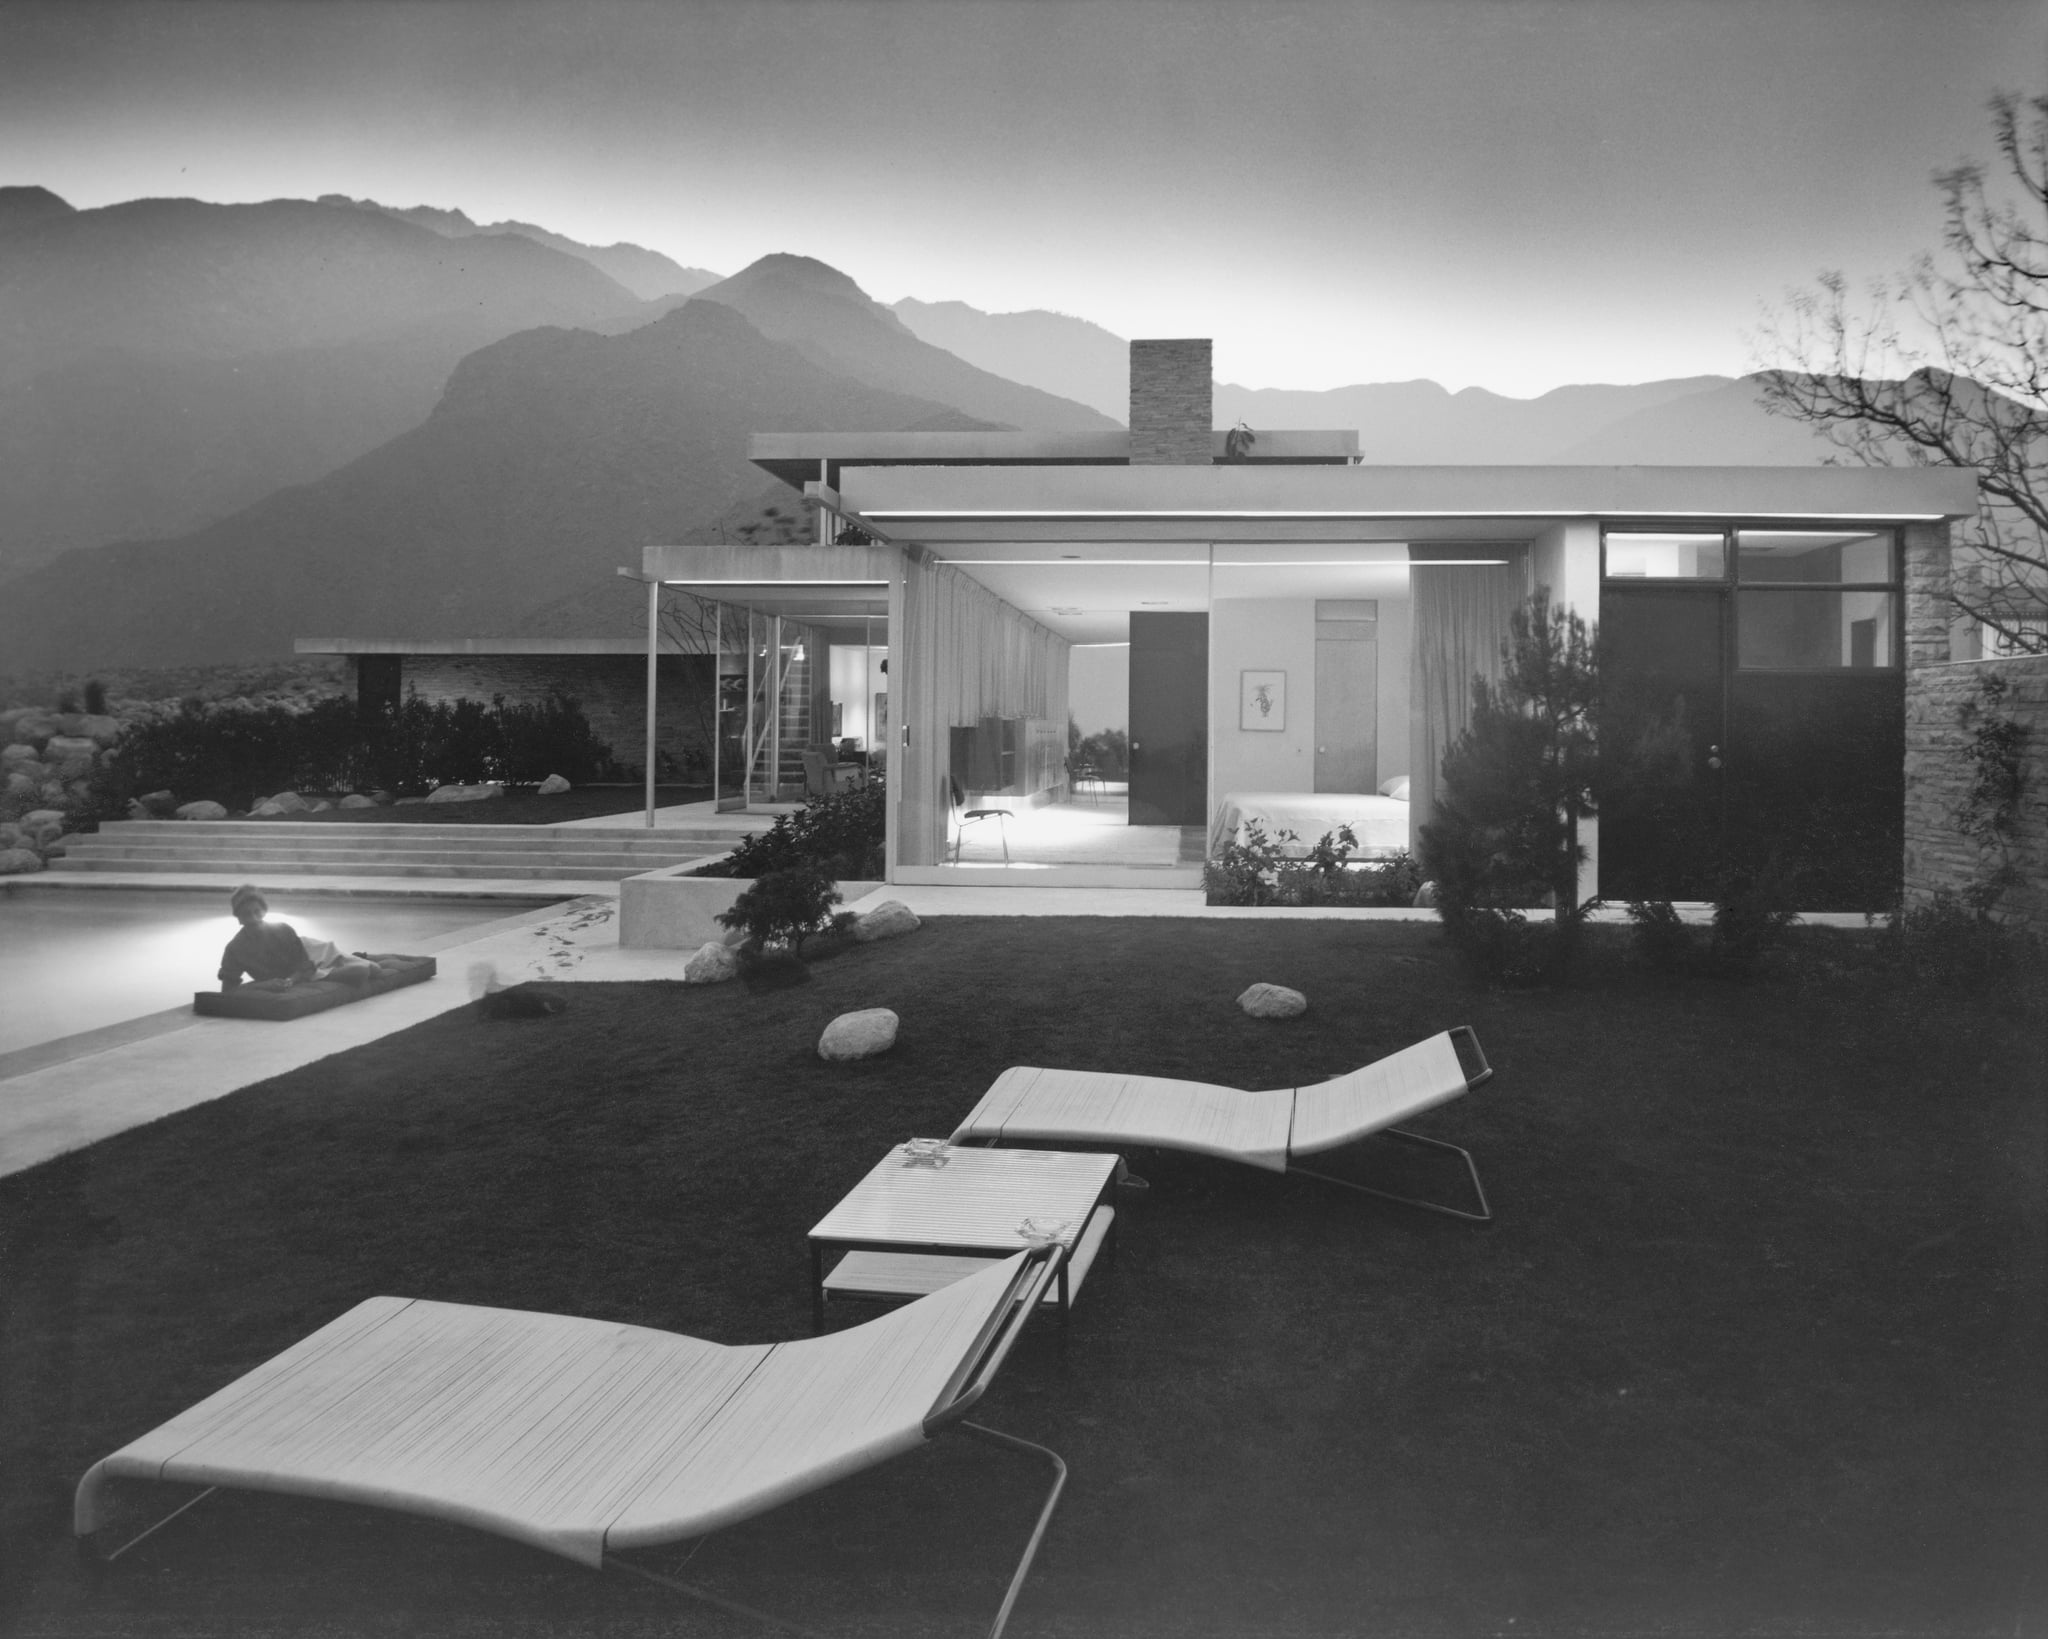 Iconic modern architecture by Richard Neutra, photographed by Julius Shulman in Palm Springs